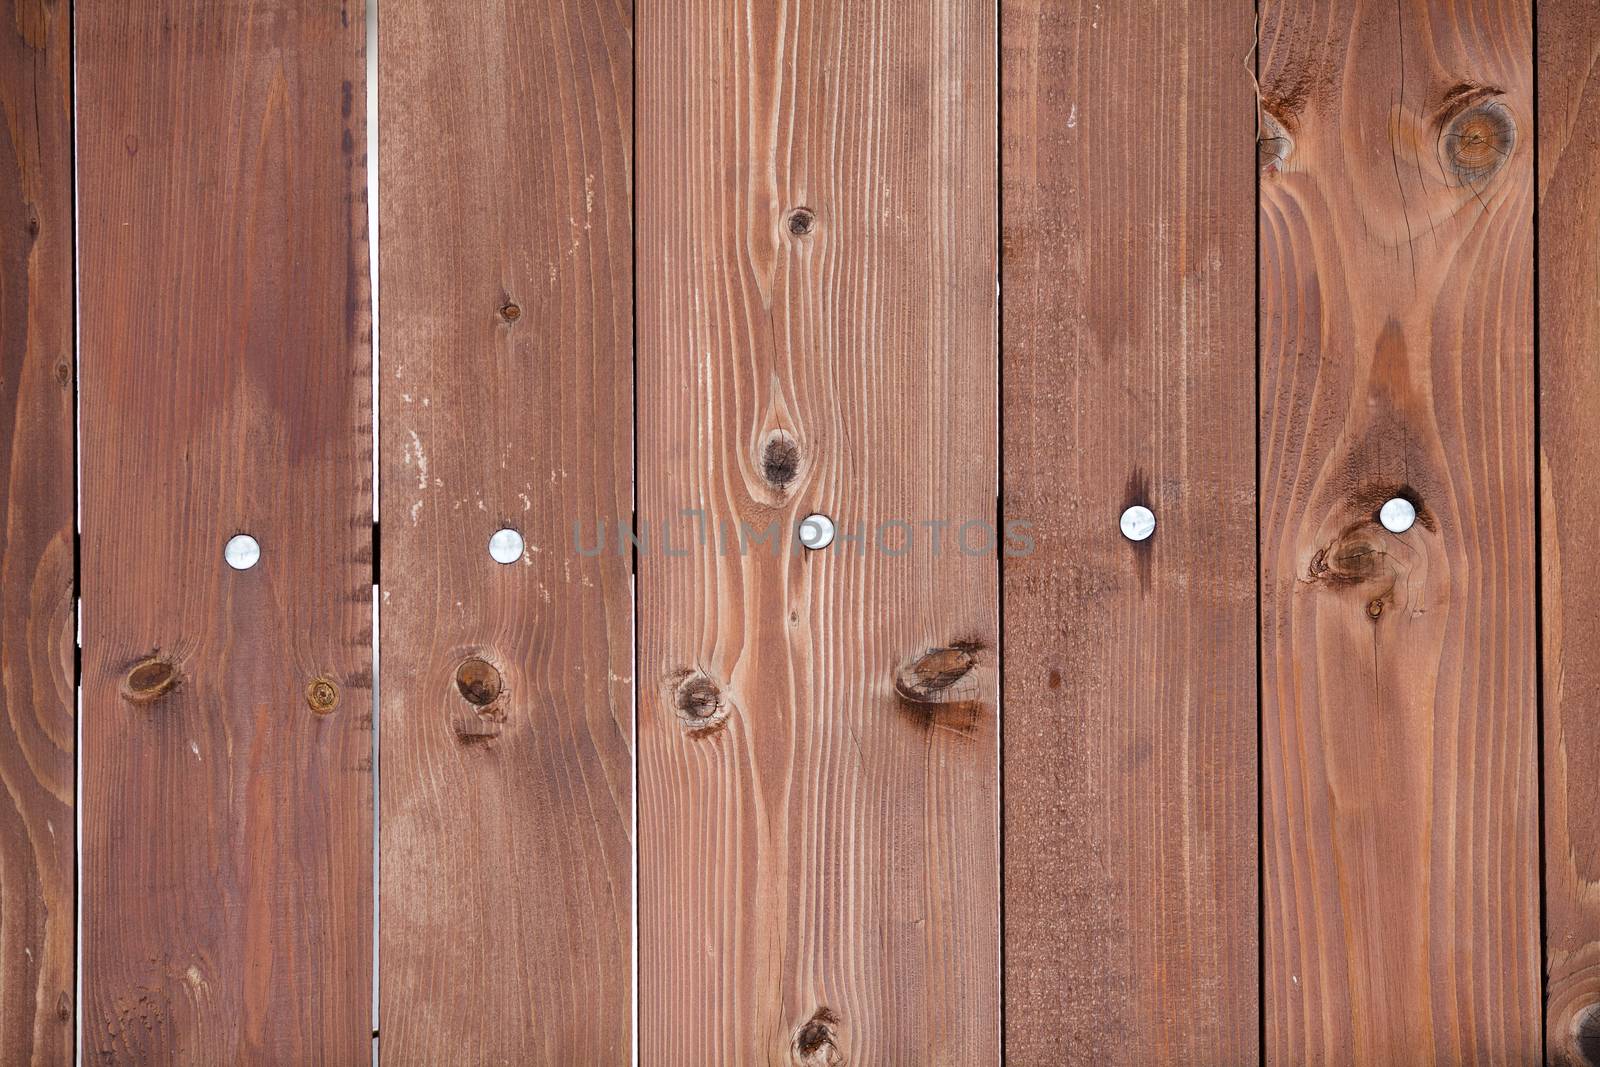 Natural wooden background with nails